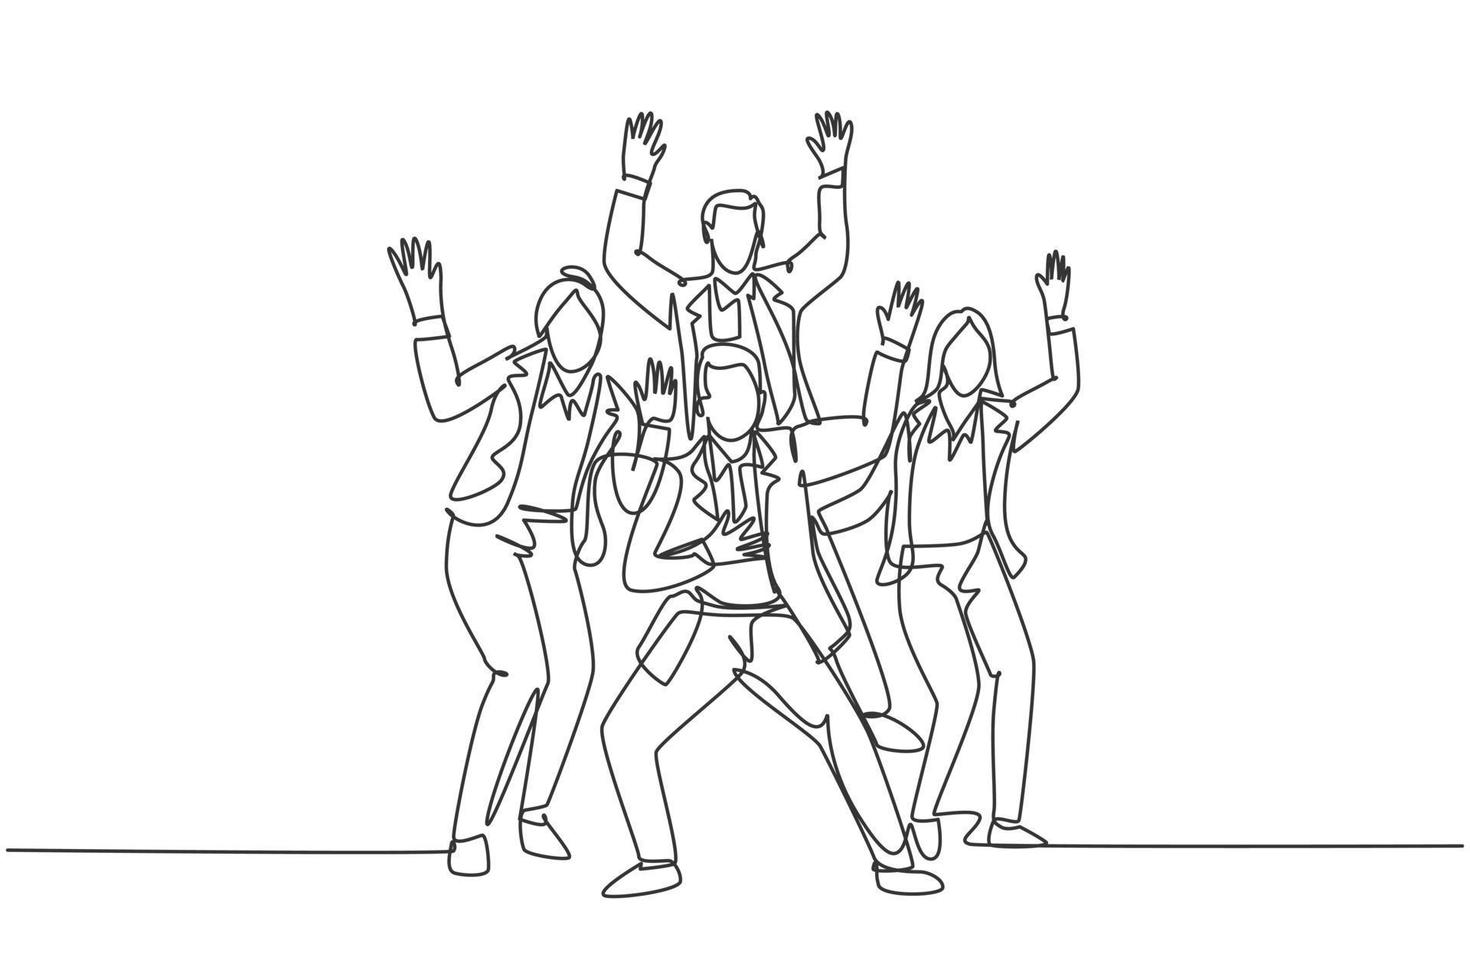 Single continuous line drawing of young happy male and female trainer prancing with joy at the seminar room together. Business teamwork celebration concept one line draw design vector illustration